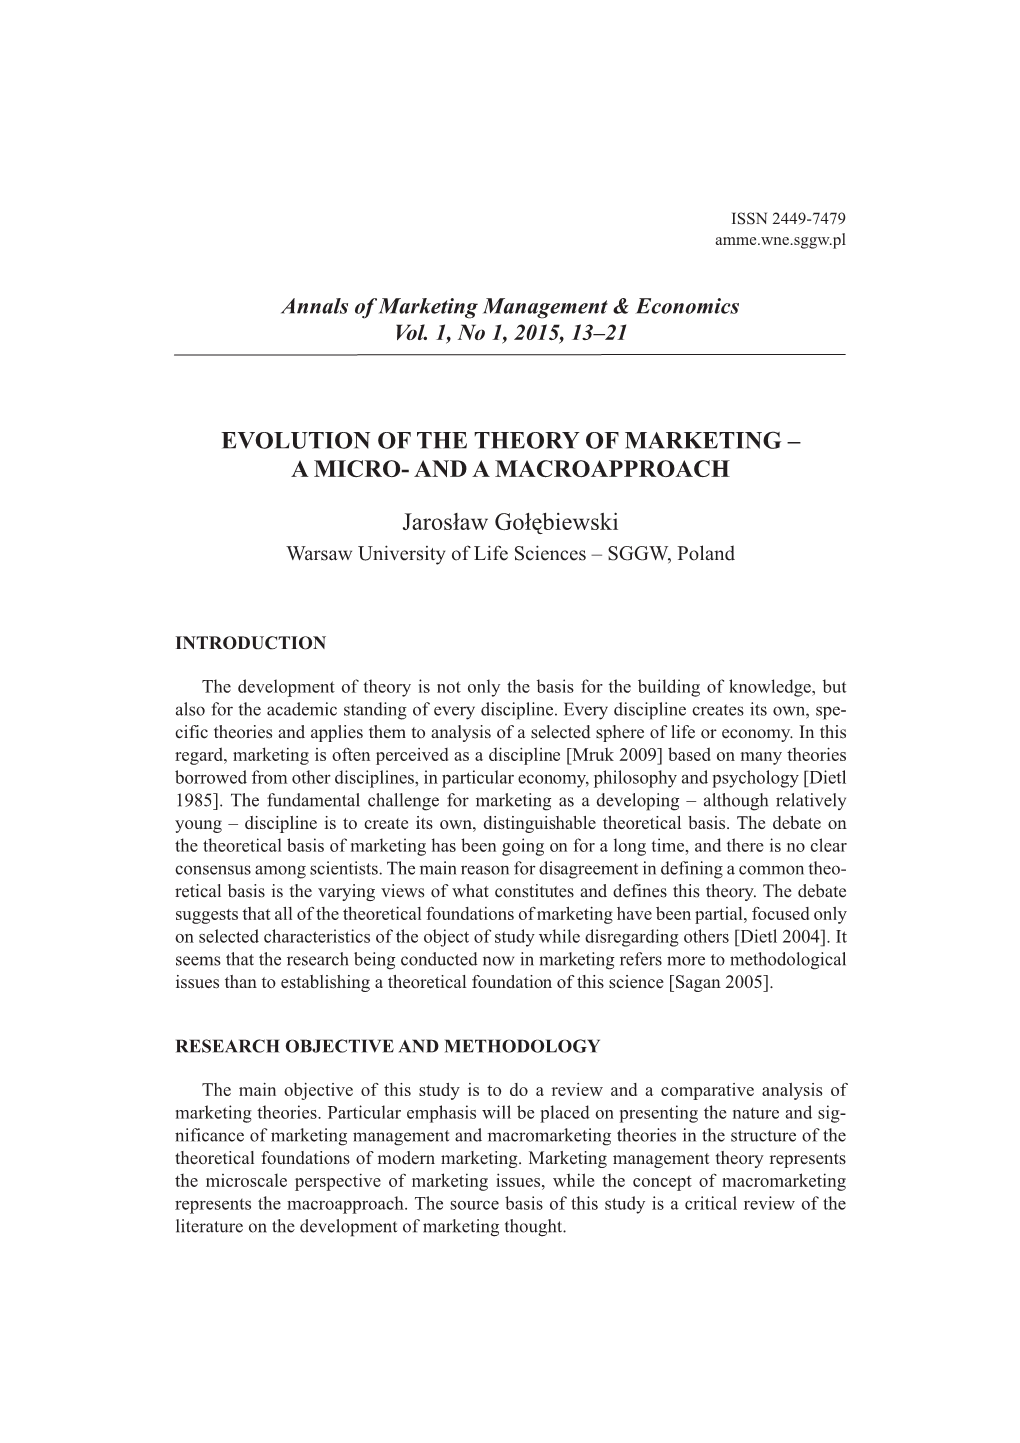 Evolution of Theory of Marketing – a Micro- and a Macroapproach